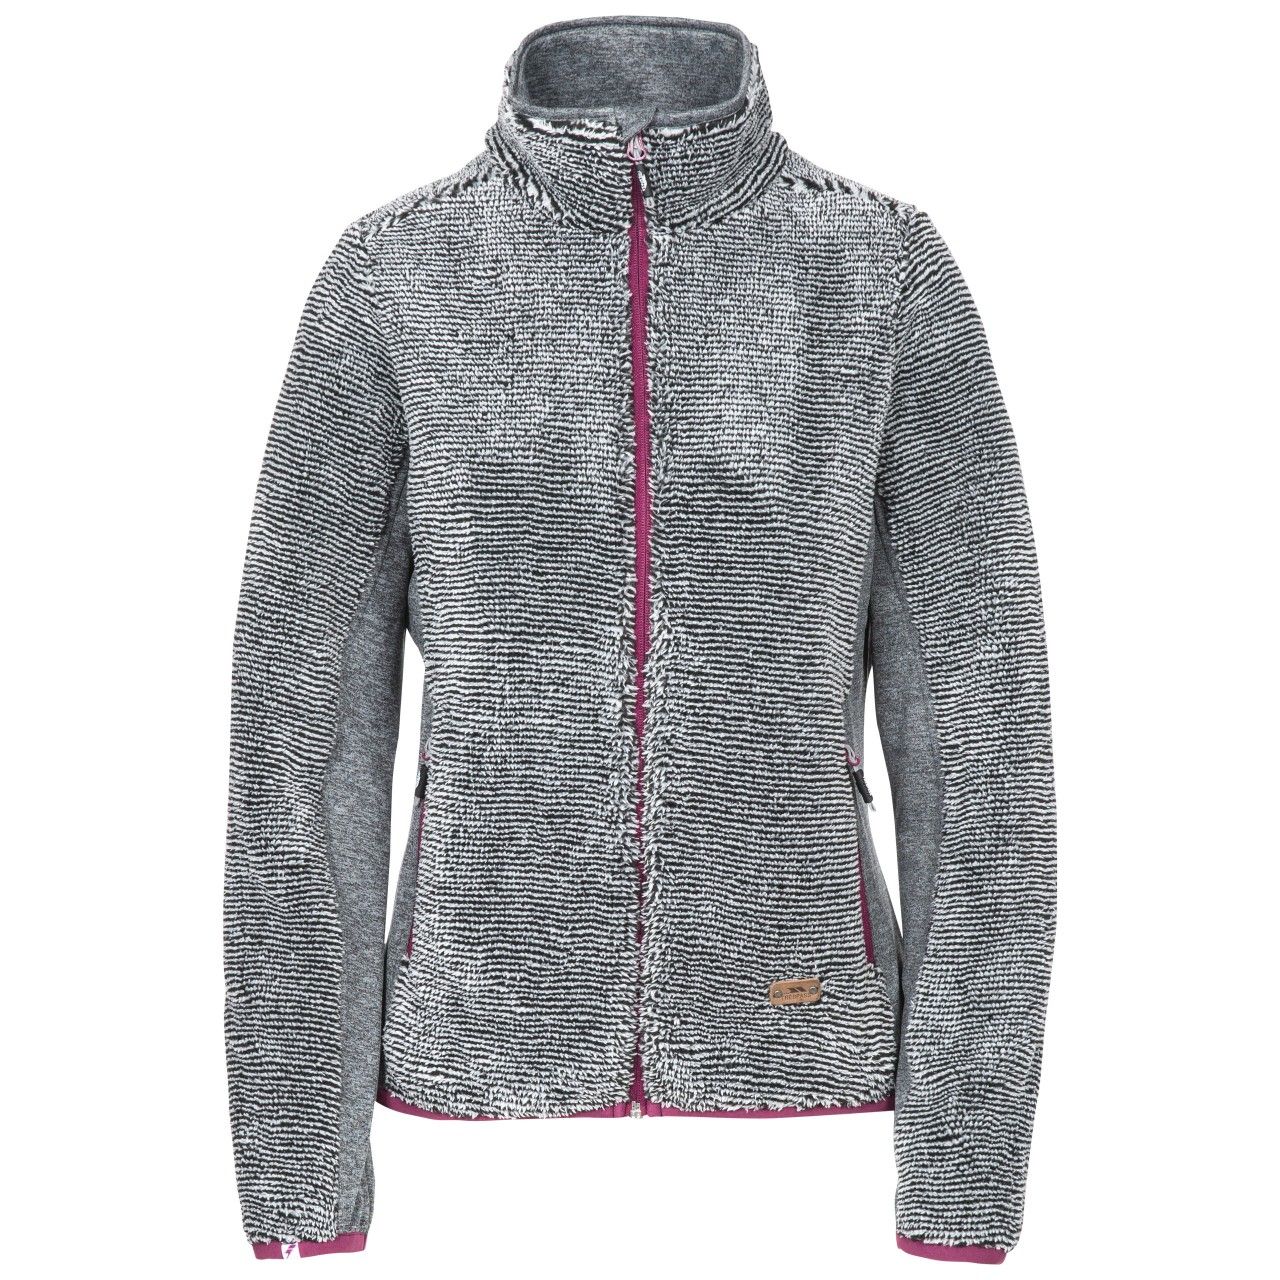 Stripe fleece. Stretch panels. 2 contrast zip pockets. Contrast stretch bindings. Airtrap. 360gsm. 100% Polyester fleece, 95% Polyester/5% Elastane stretch panel. Trespass Womens Chest Sizing (approx): XS/8 - 32in/81cm, S/10 - 34in/86cm, M/12 - 36in/91.4cm, L/14 - 38in/96.5cm, XL/16 - 40in/101.5cm, XXL/18 - 42in/106.5cm.